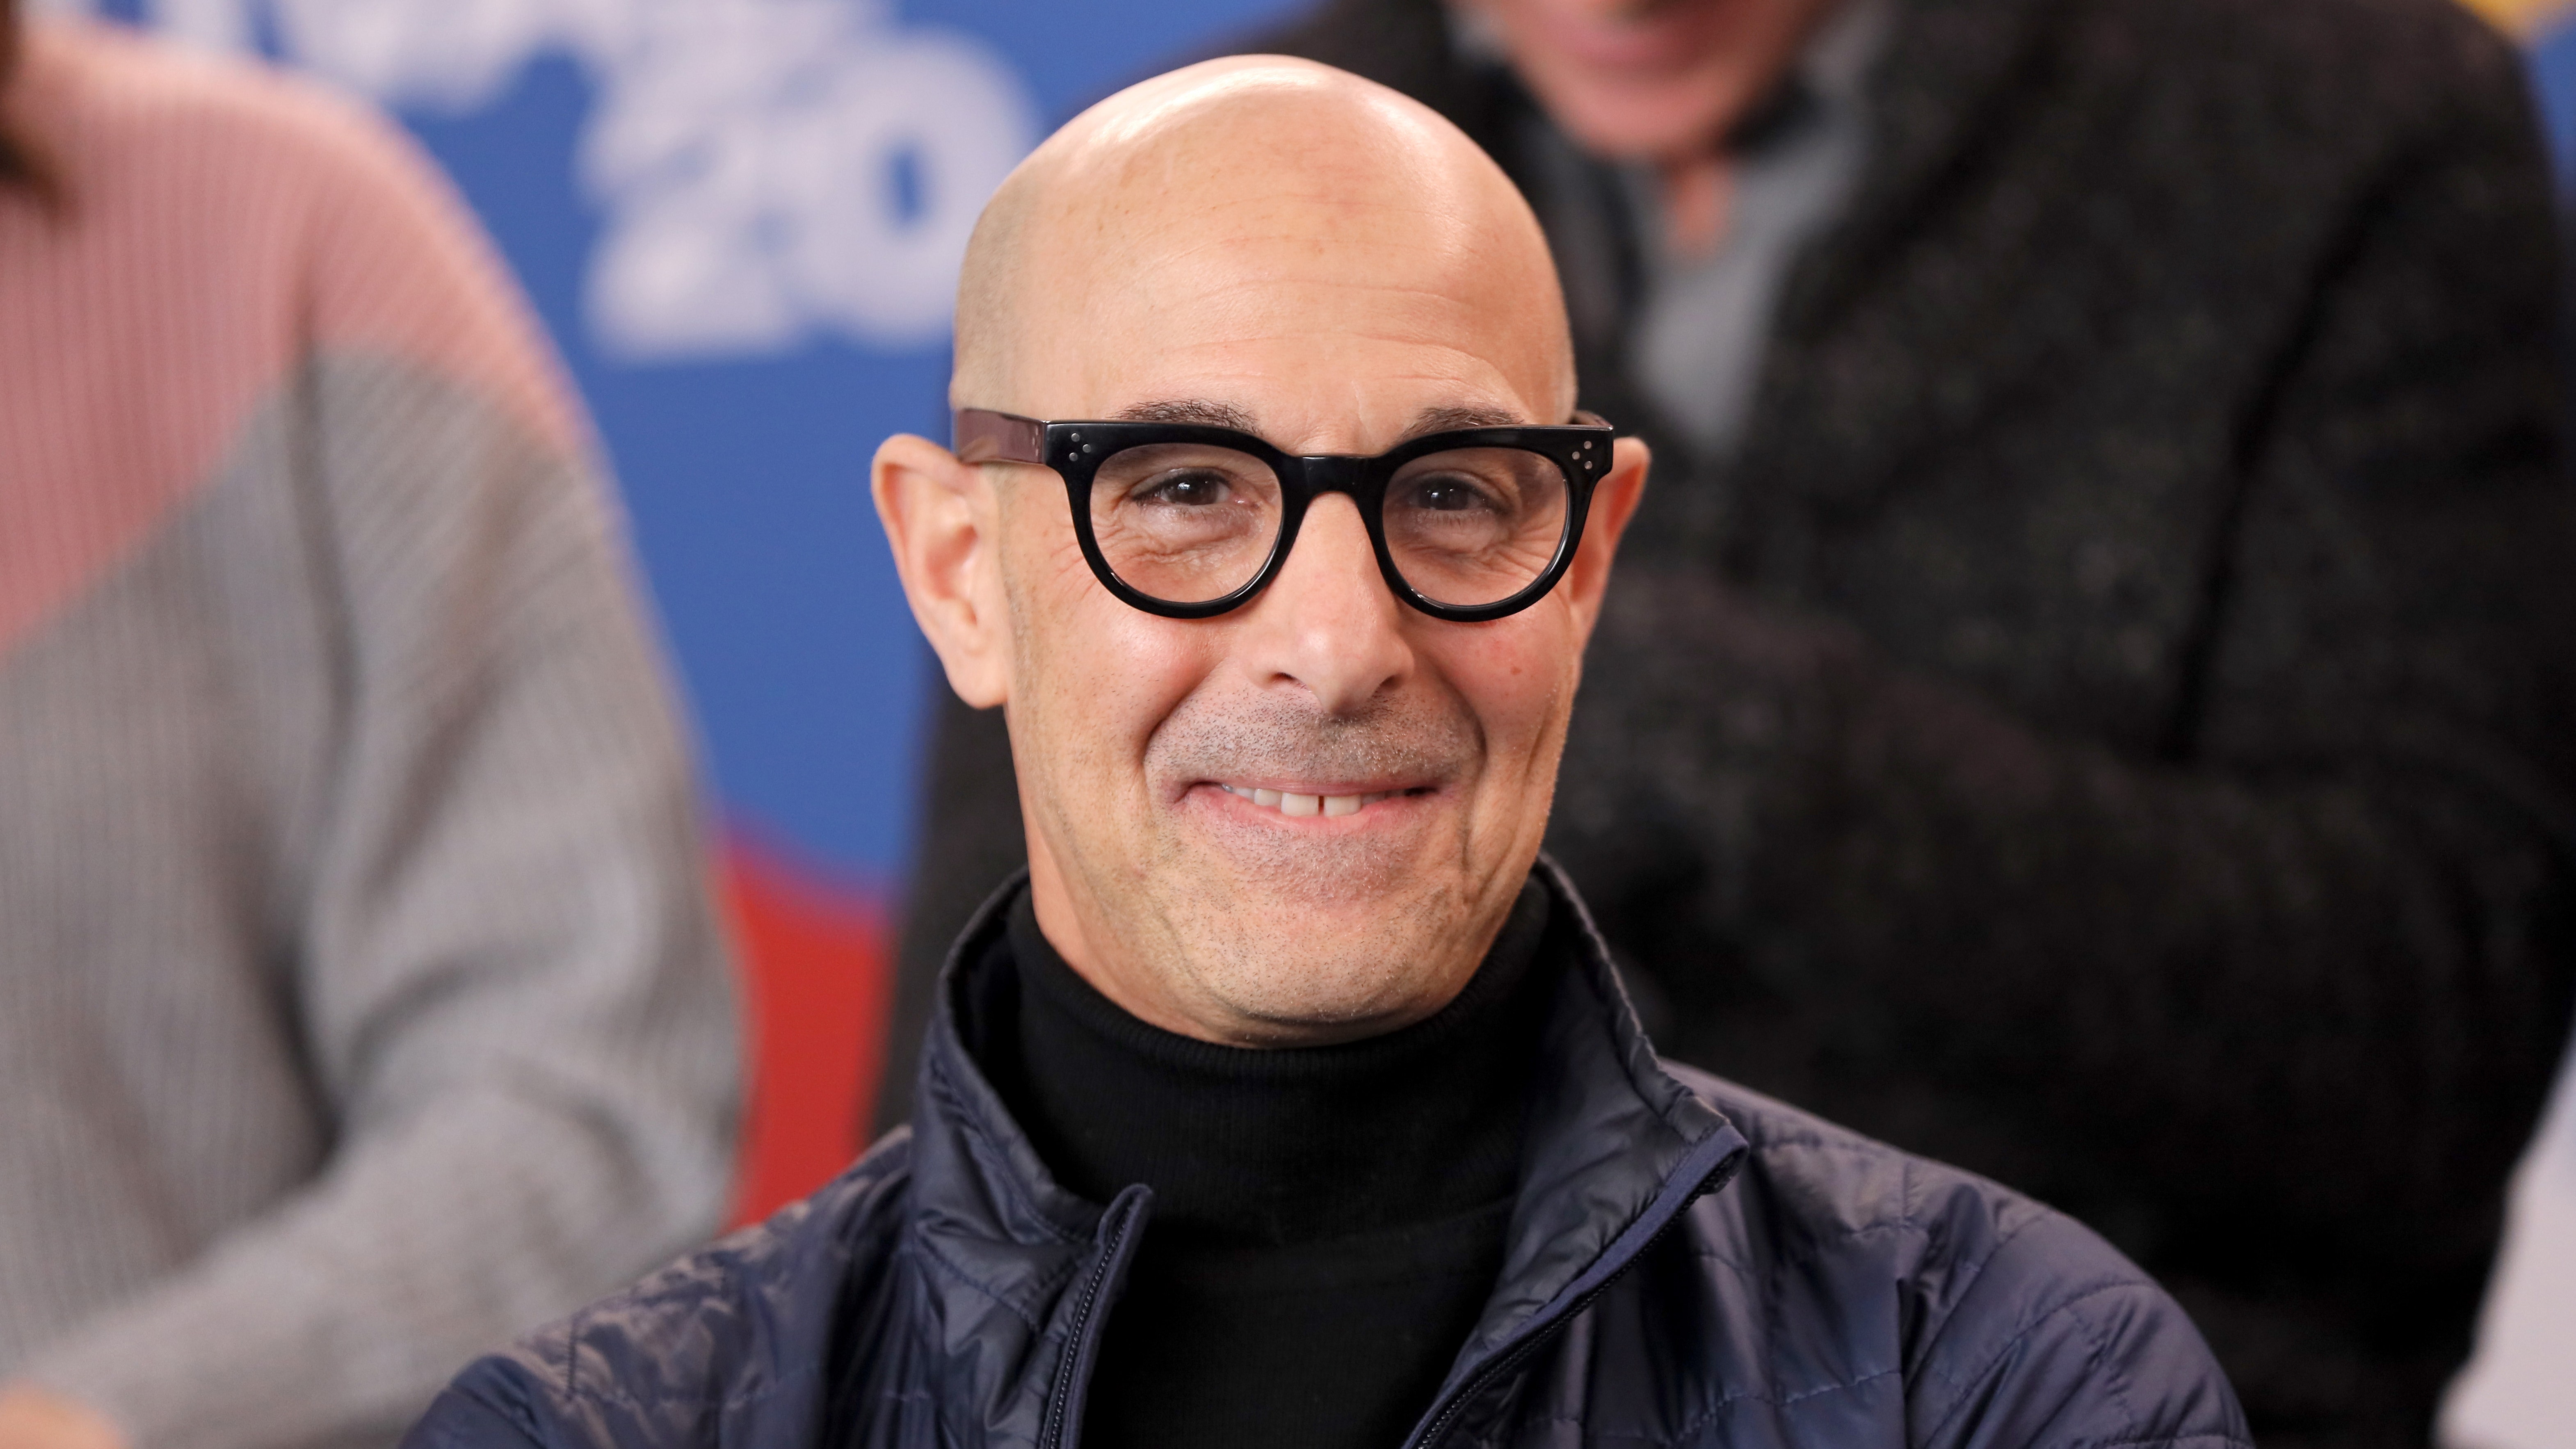 Stanley Tucci opens up about his past cancer diagnosis: 'I had a feeding tube for six months'